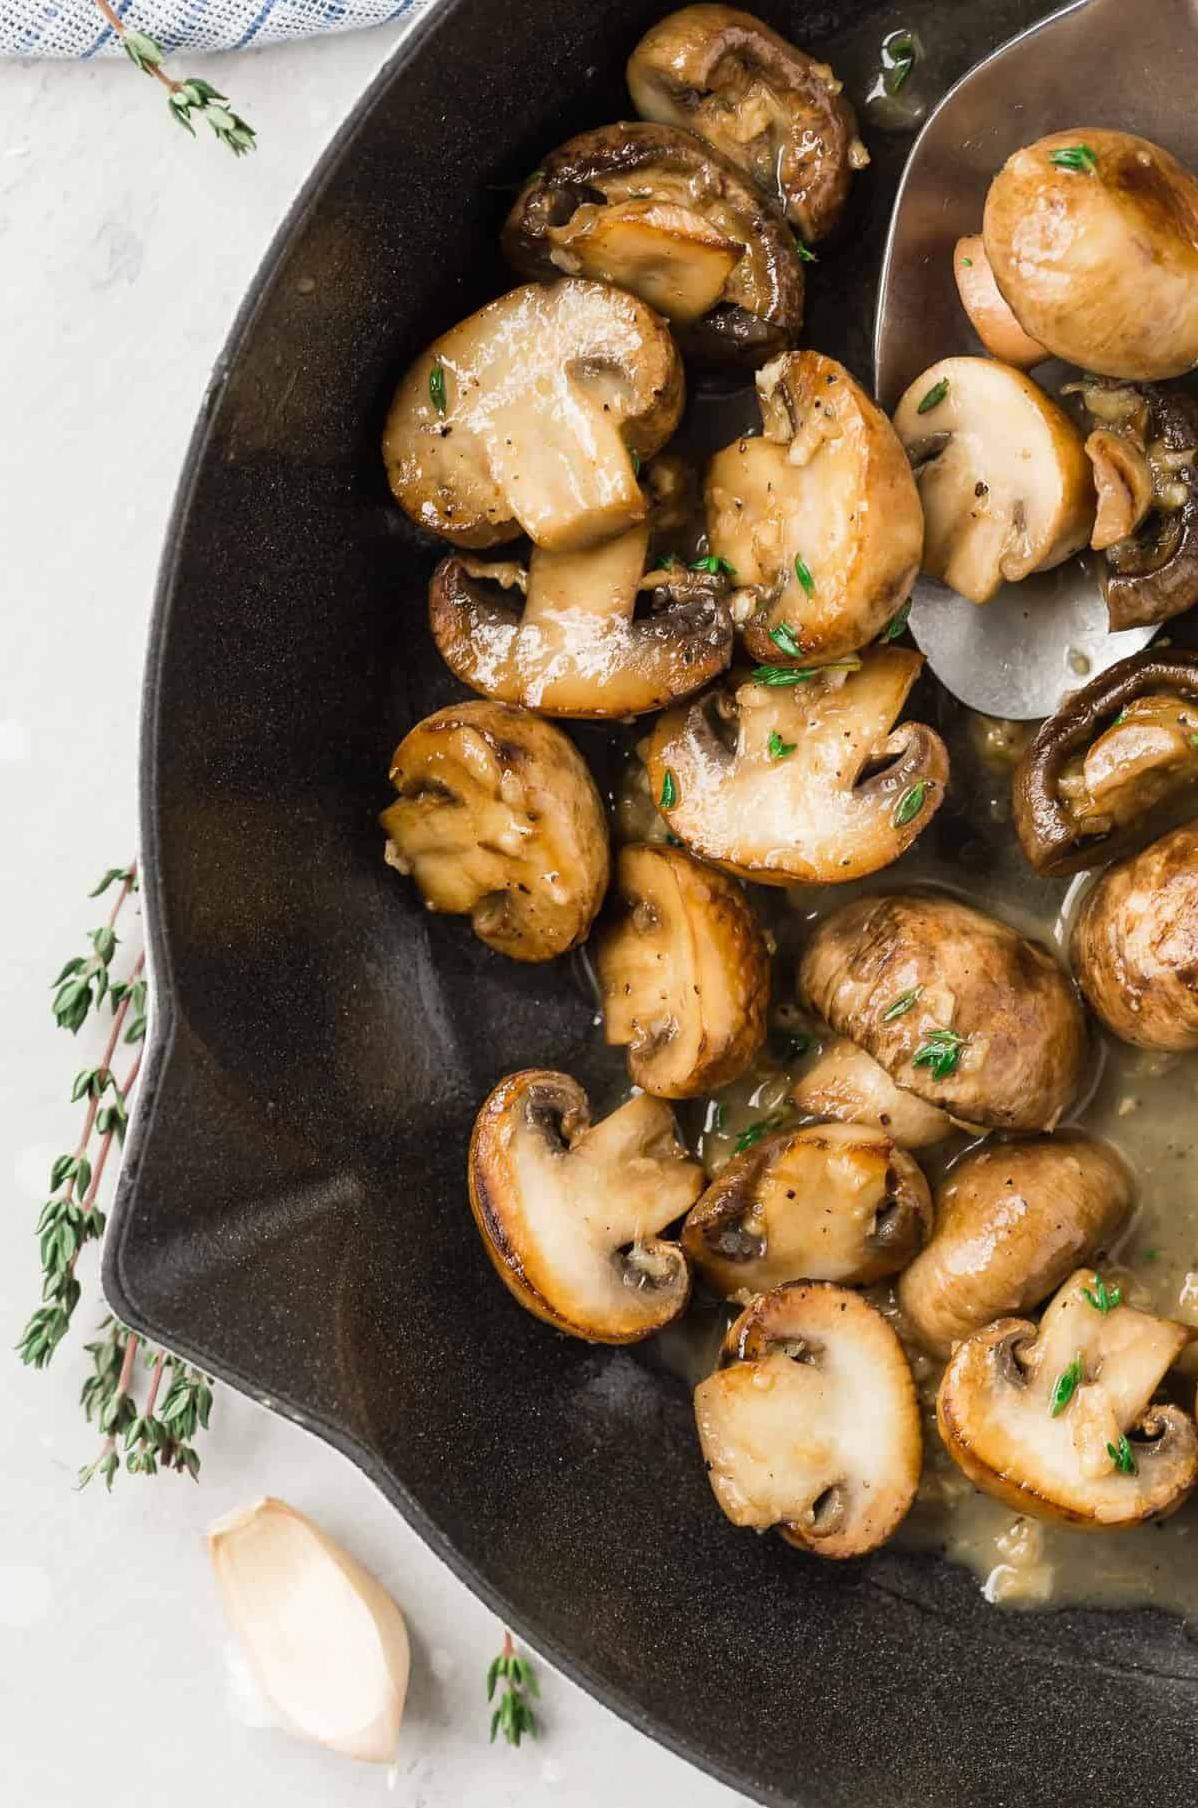  The intoxicating aroma of sautéed mushrooms in wine will fill your kitchen.